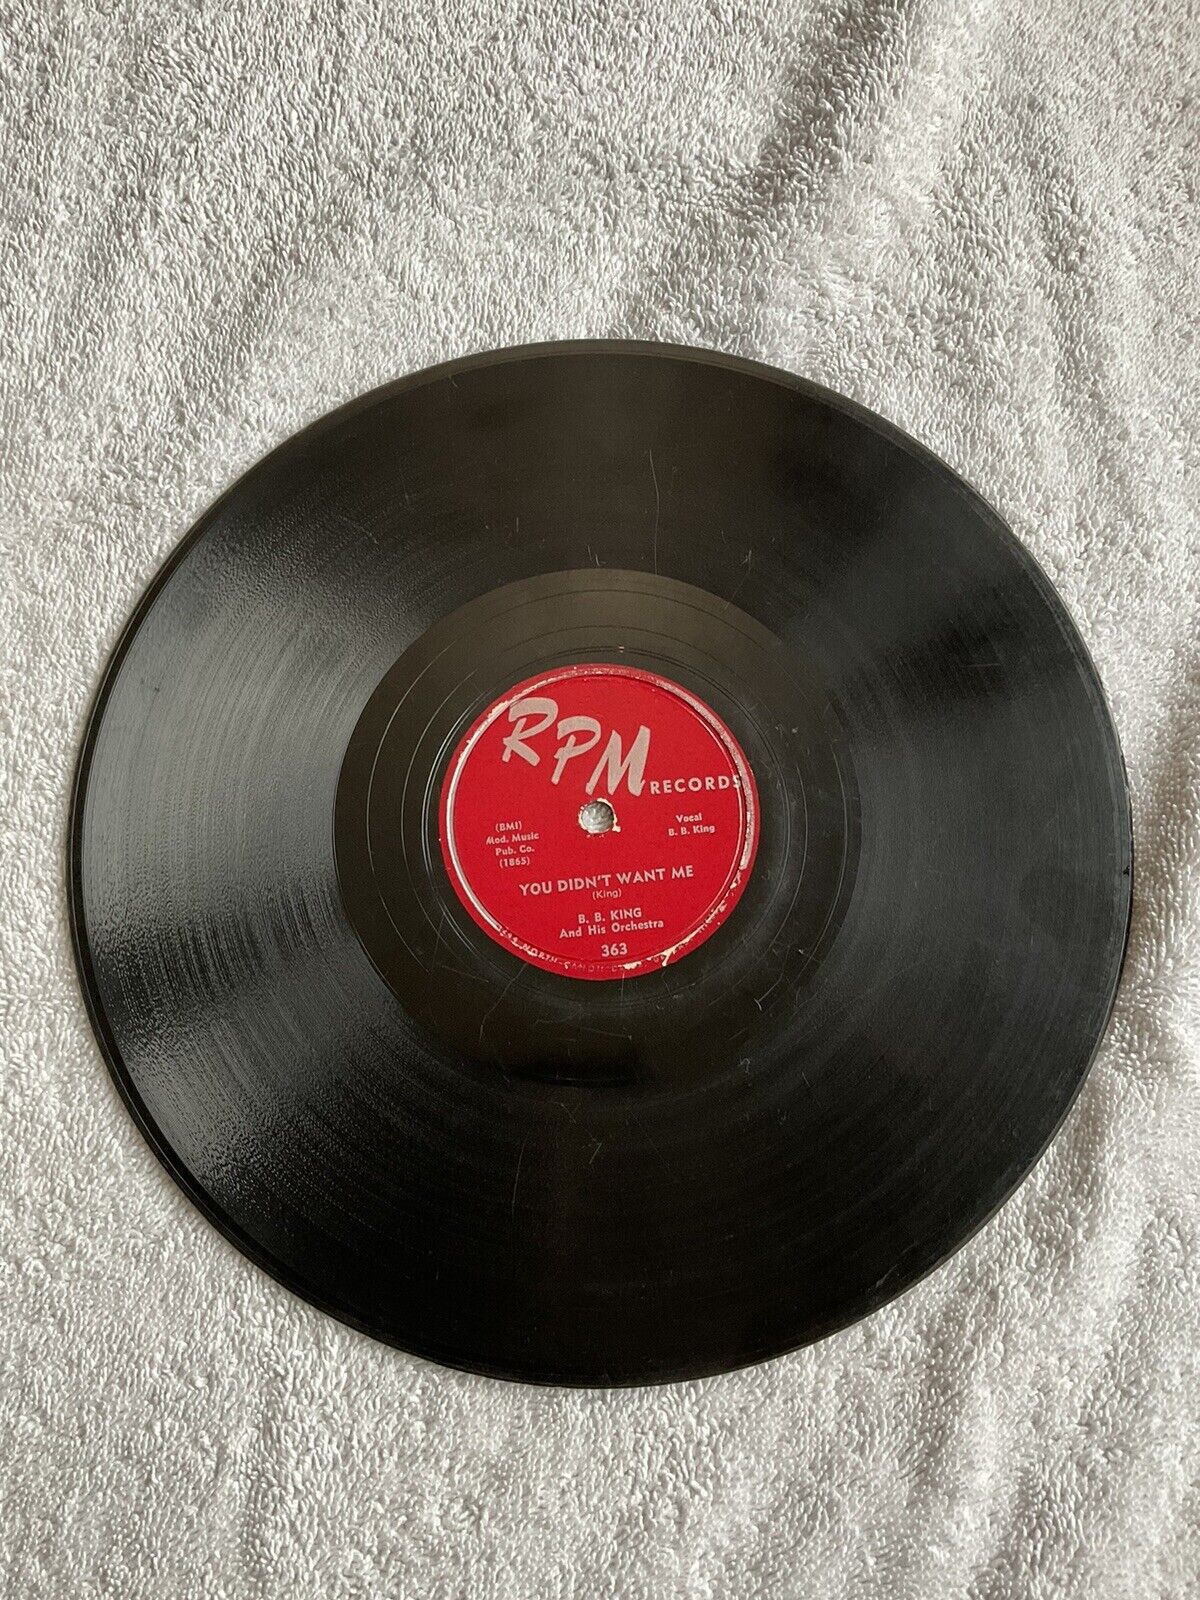 BB KING RPM 363 78 RPM YOU DIDN’T WANT ME B/W YOU KNOW I LOVE YOU BLUES 10”